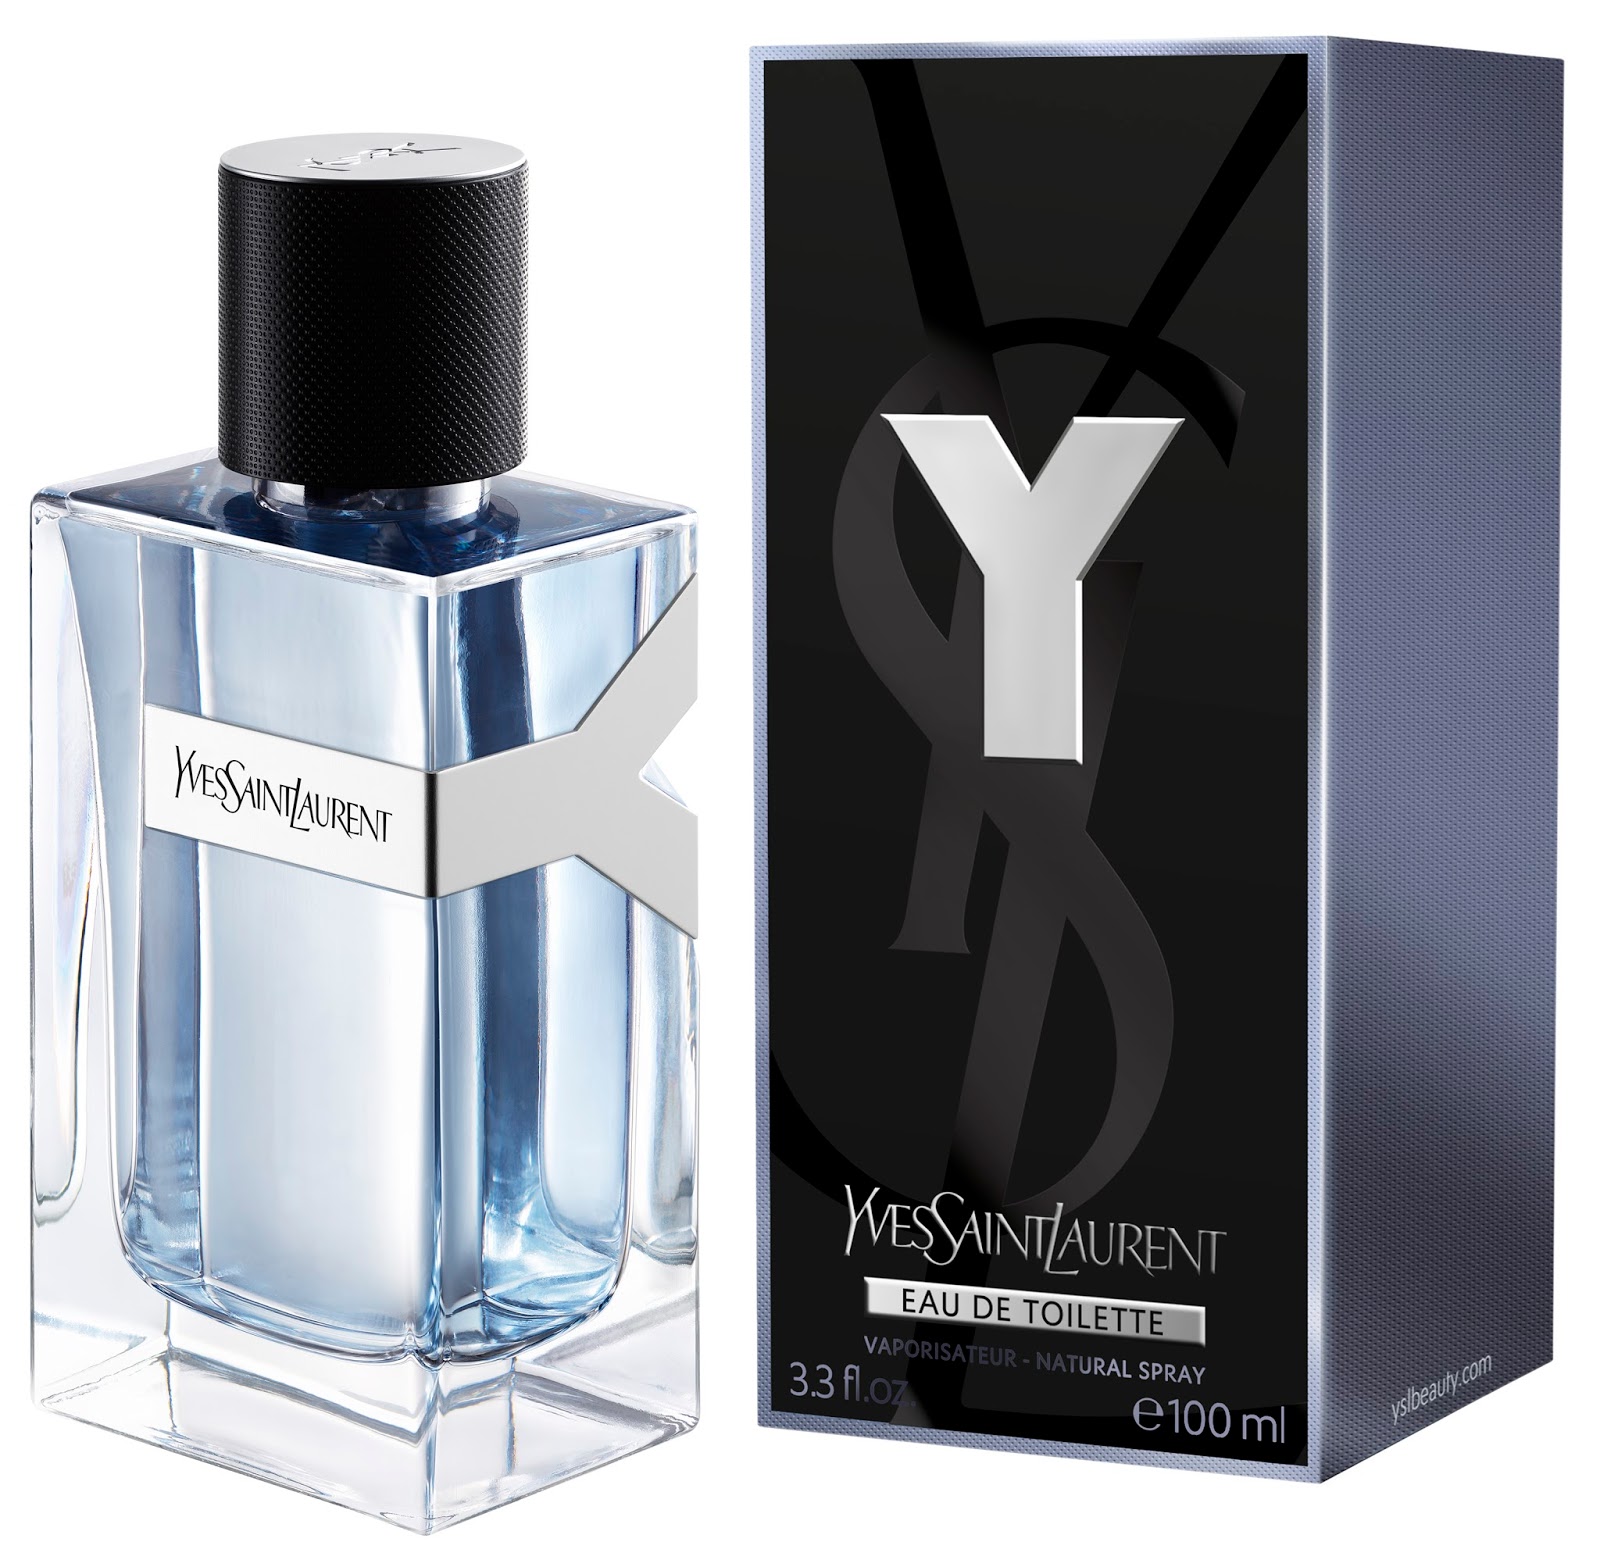 Beauty news: Adam Levine tapped for YSL's Y US fragrance ambassador